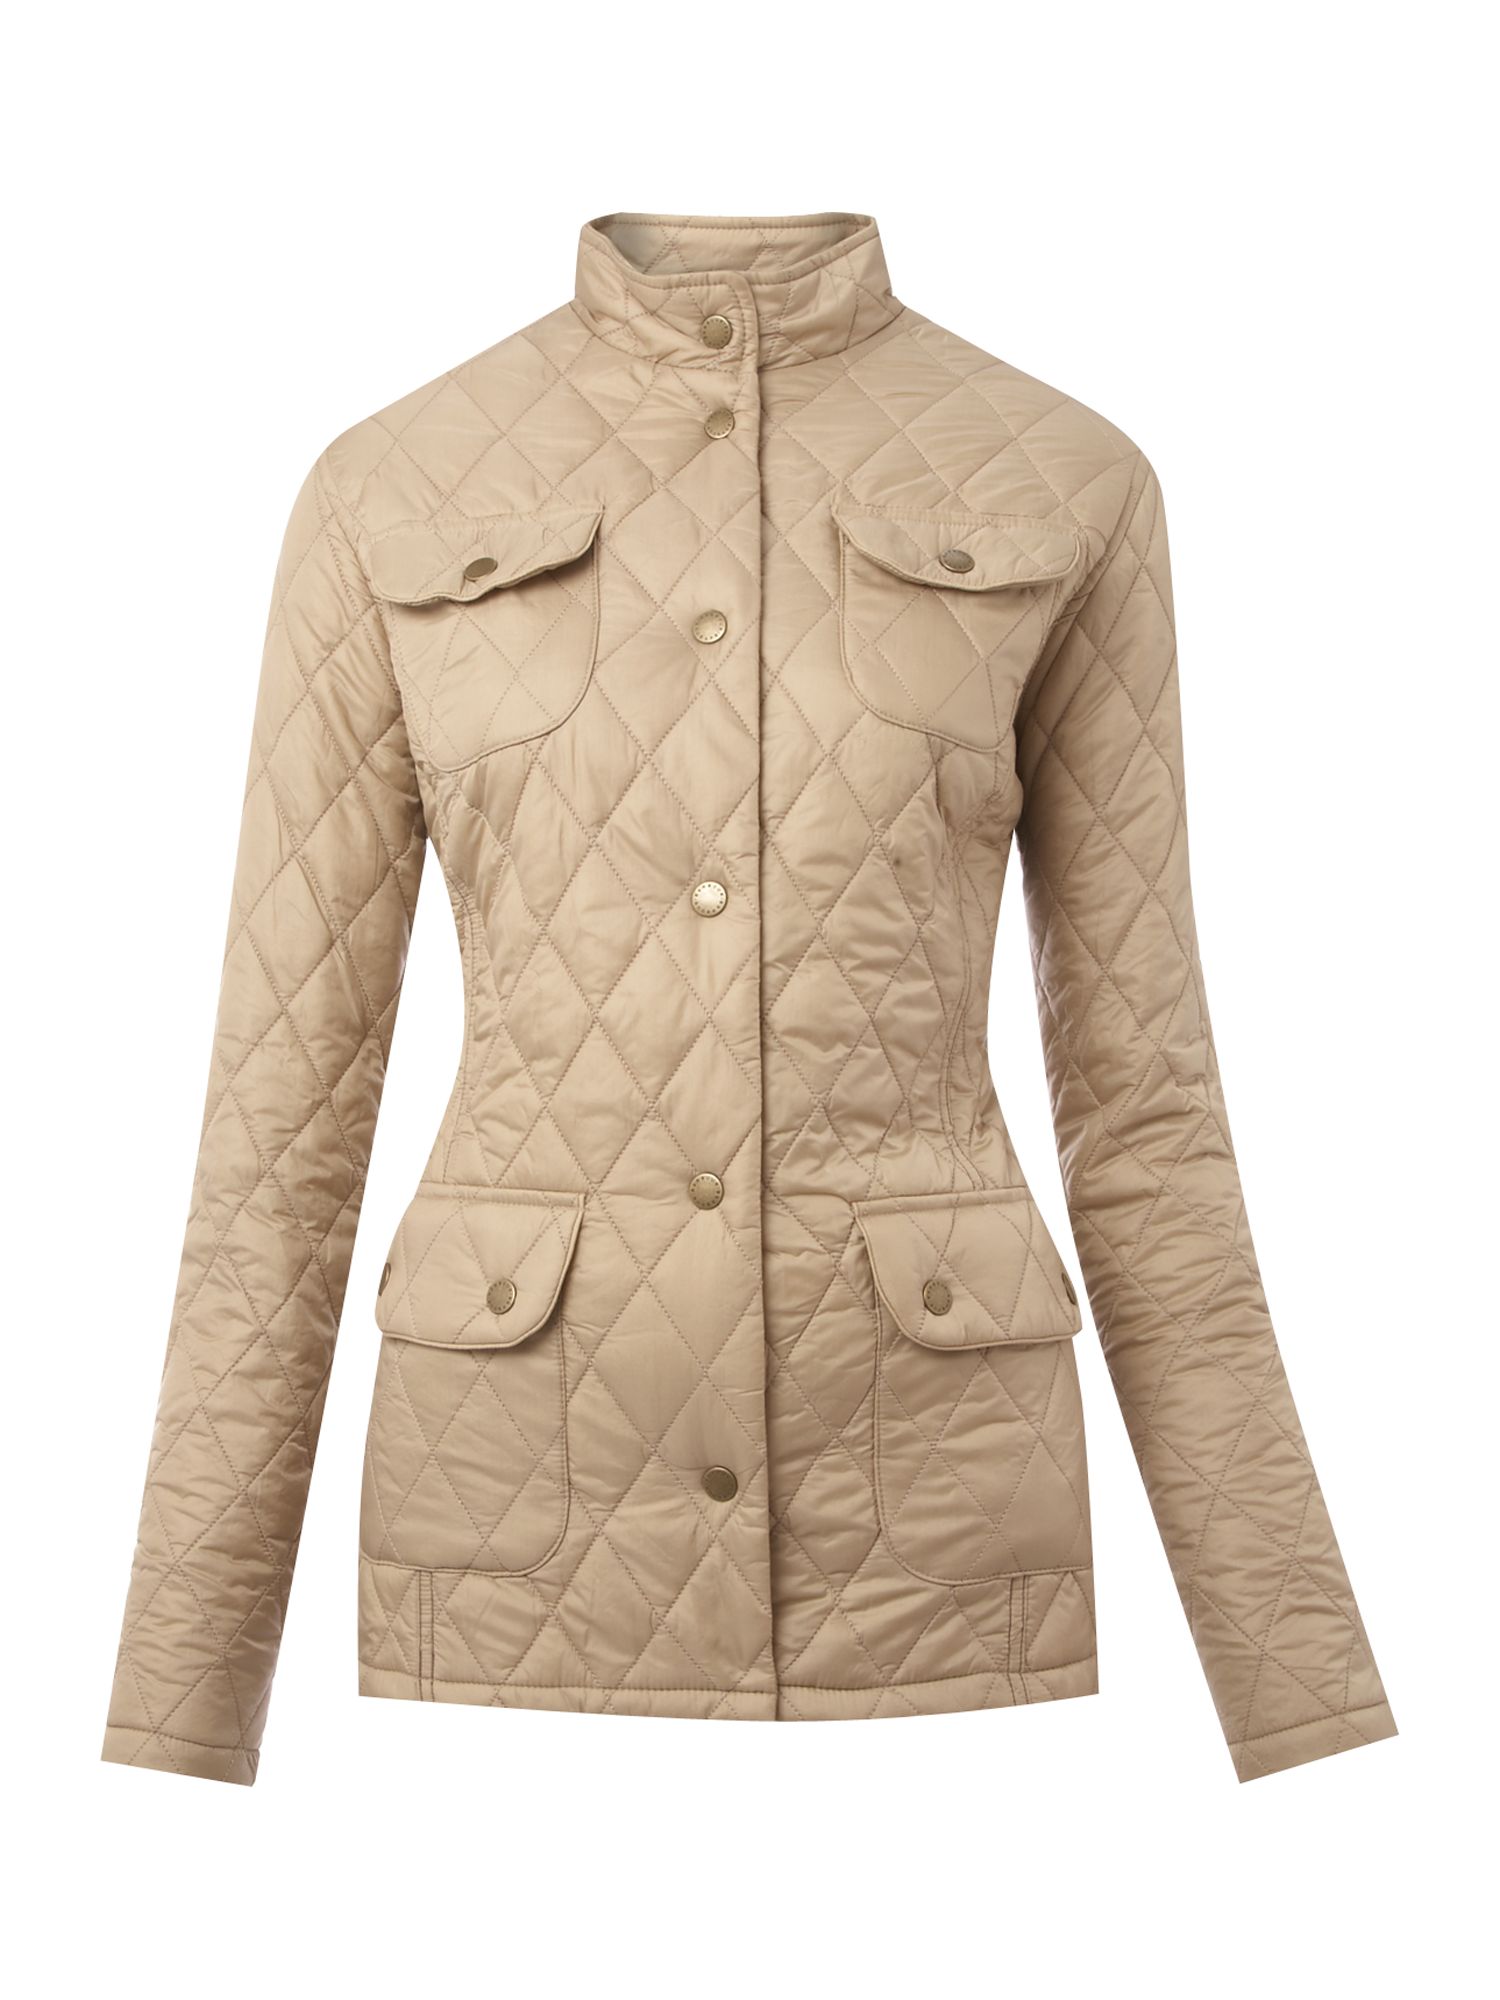 Barbour Flyweight Utility Quilted Jacket in Beige (stone) | Lyst